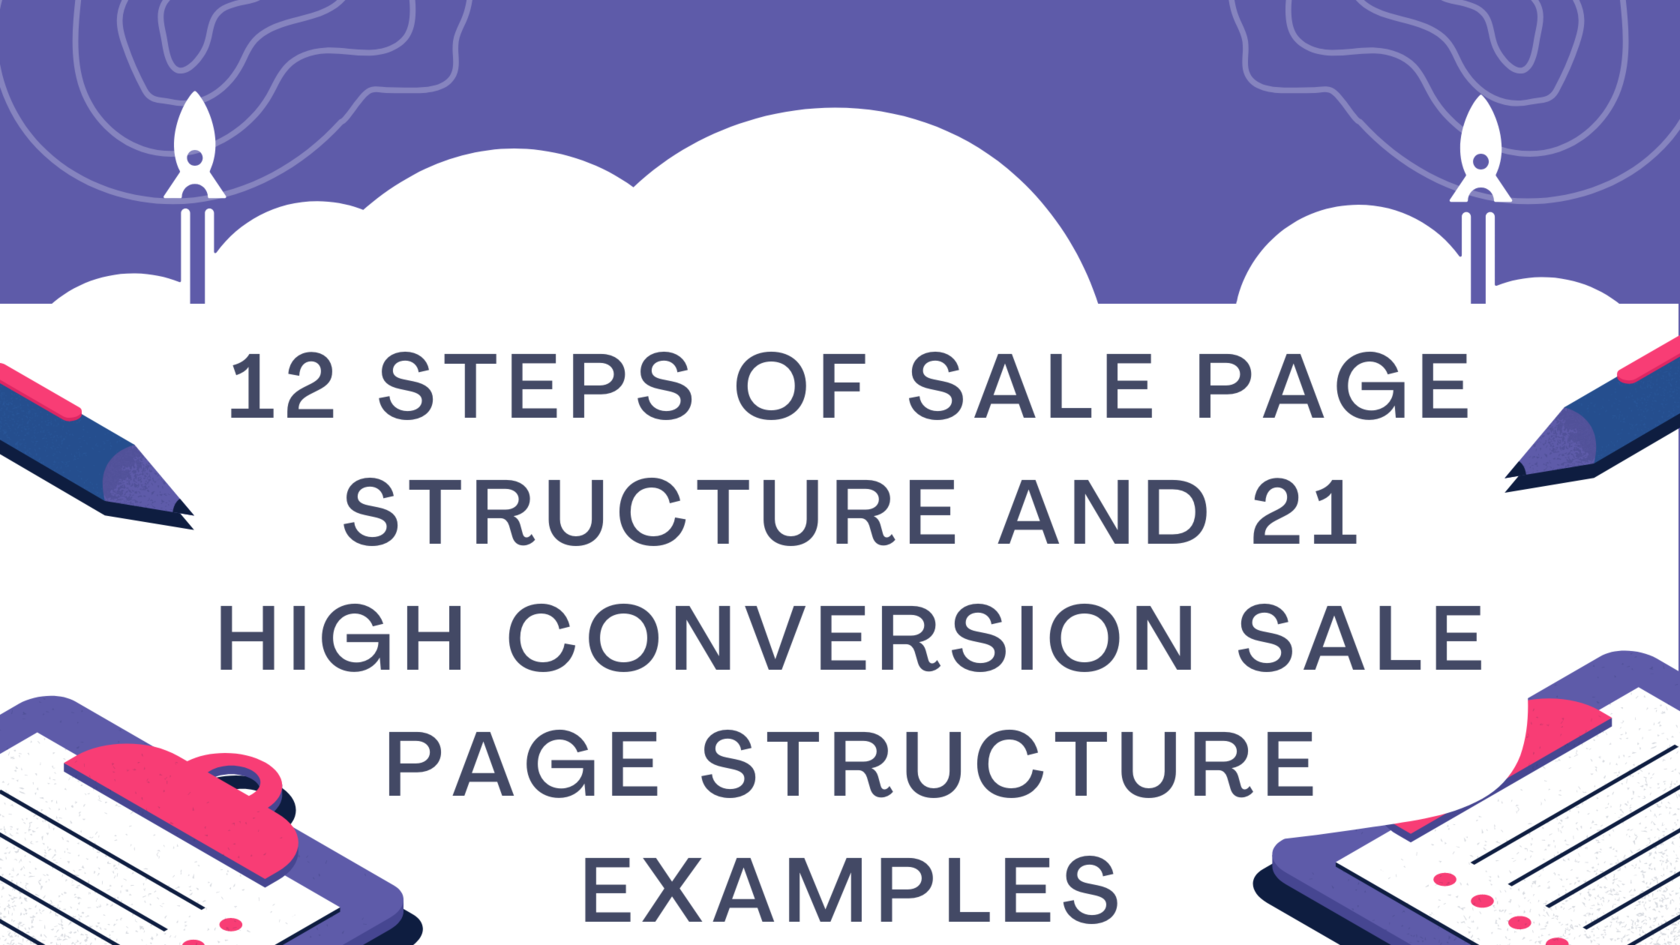 12 steps of sale page structure